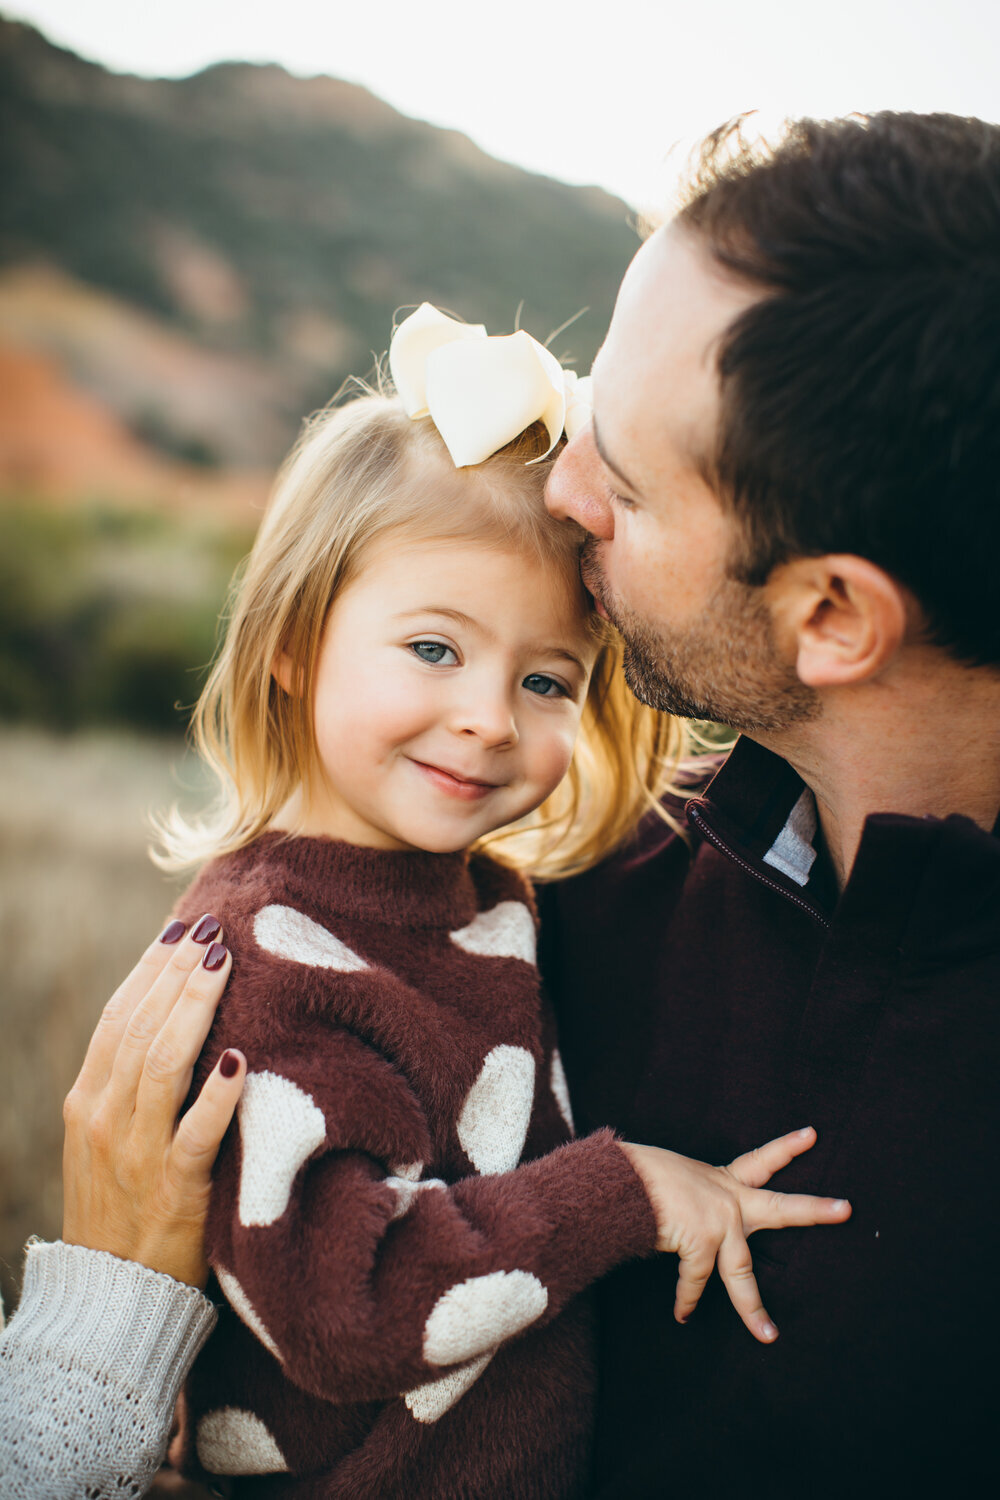  Sweet kiss on the forehead from dad as this little girl smiles at the camera #tealawardphotography #texasfamilyphotographer #amarillophotographer #amarillofamilyphotographer #lifestylephotography #emotionalphotography #familyphotoshoot #family #5waystousephotos #photoprints #familyphotoalbum #photogifts #actuallyusethem 